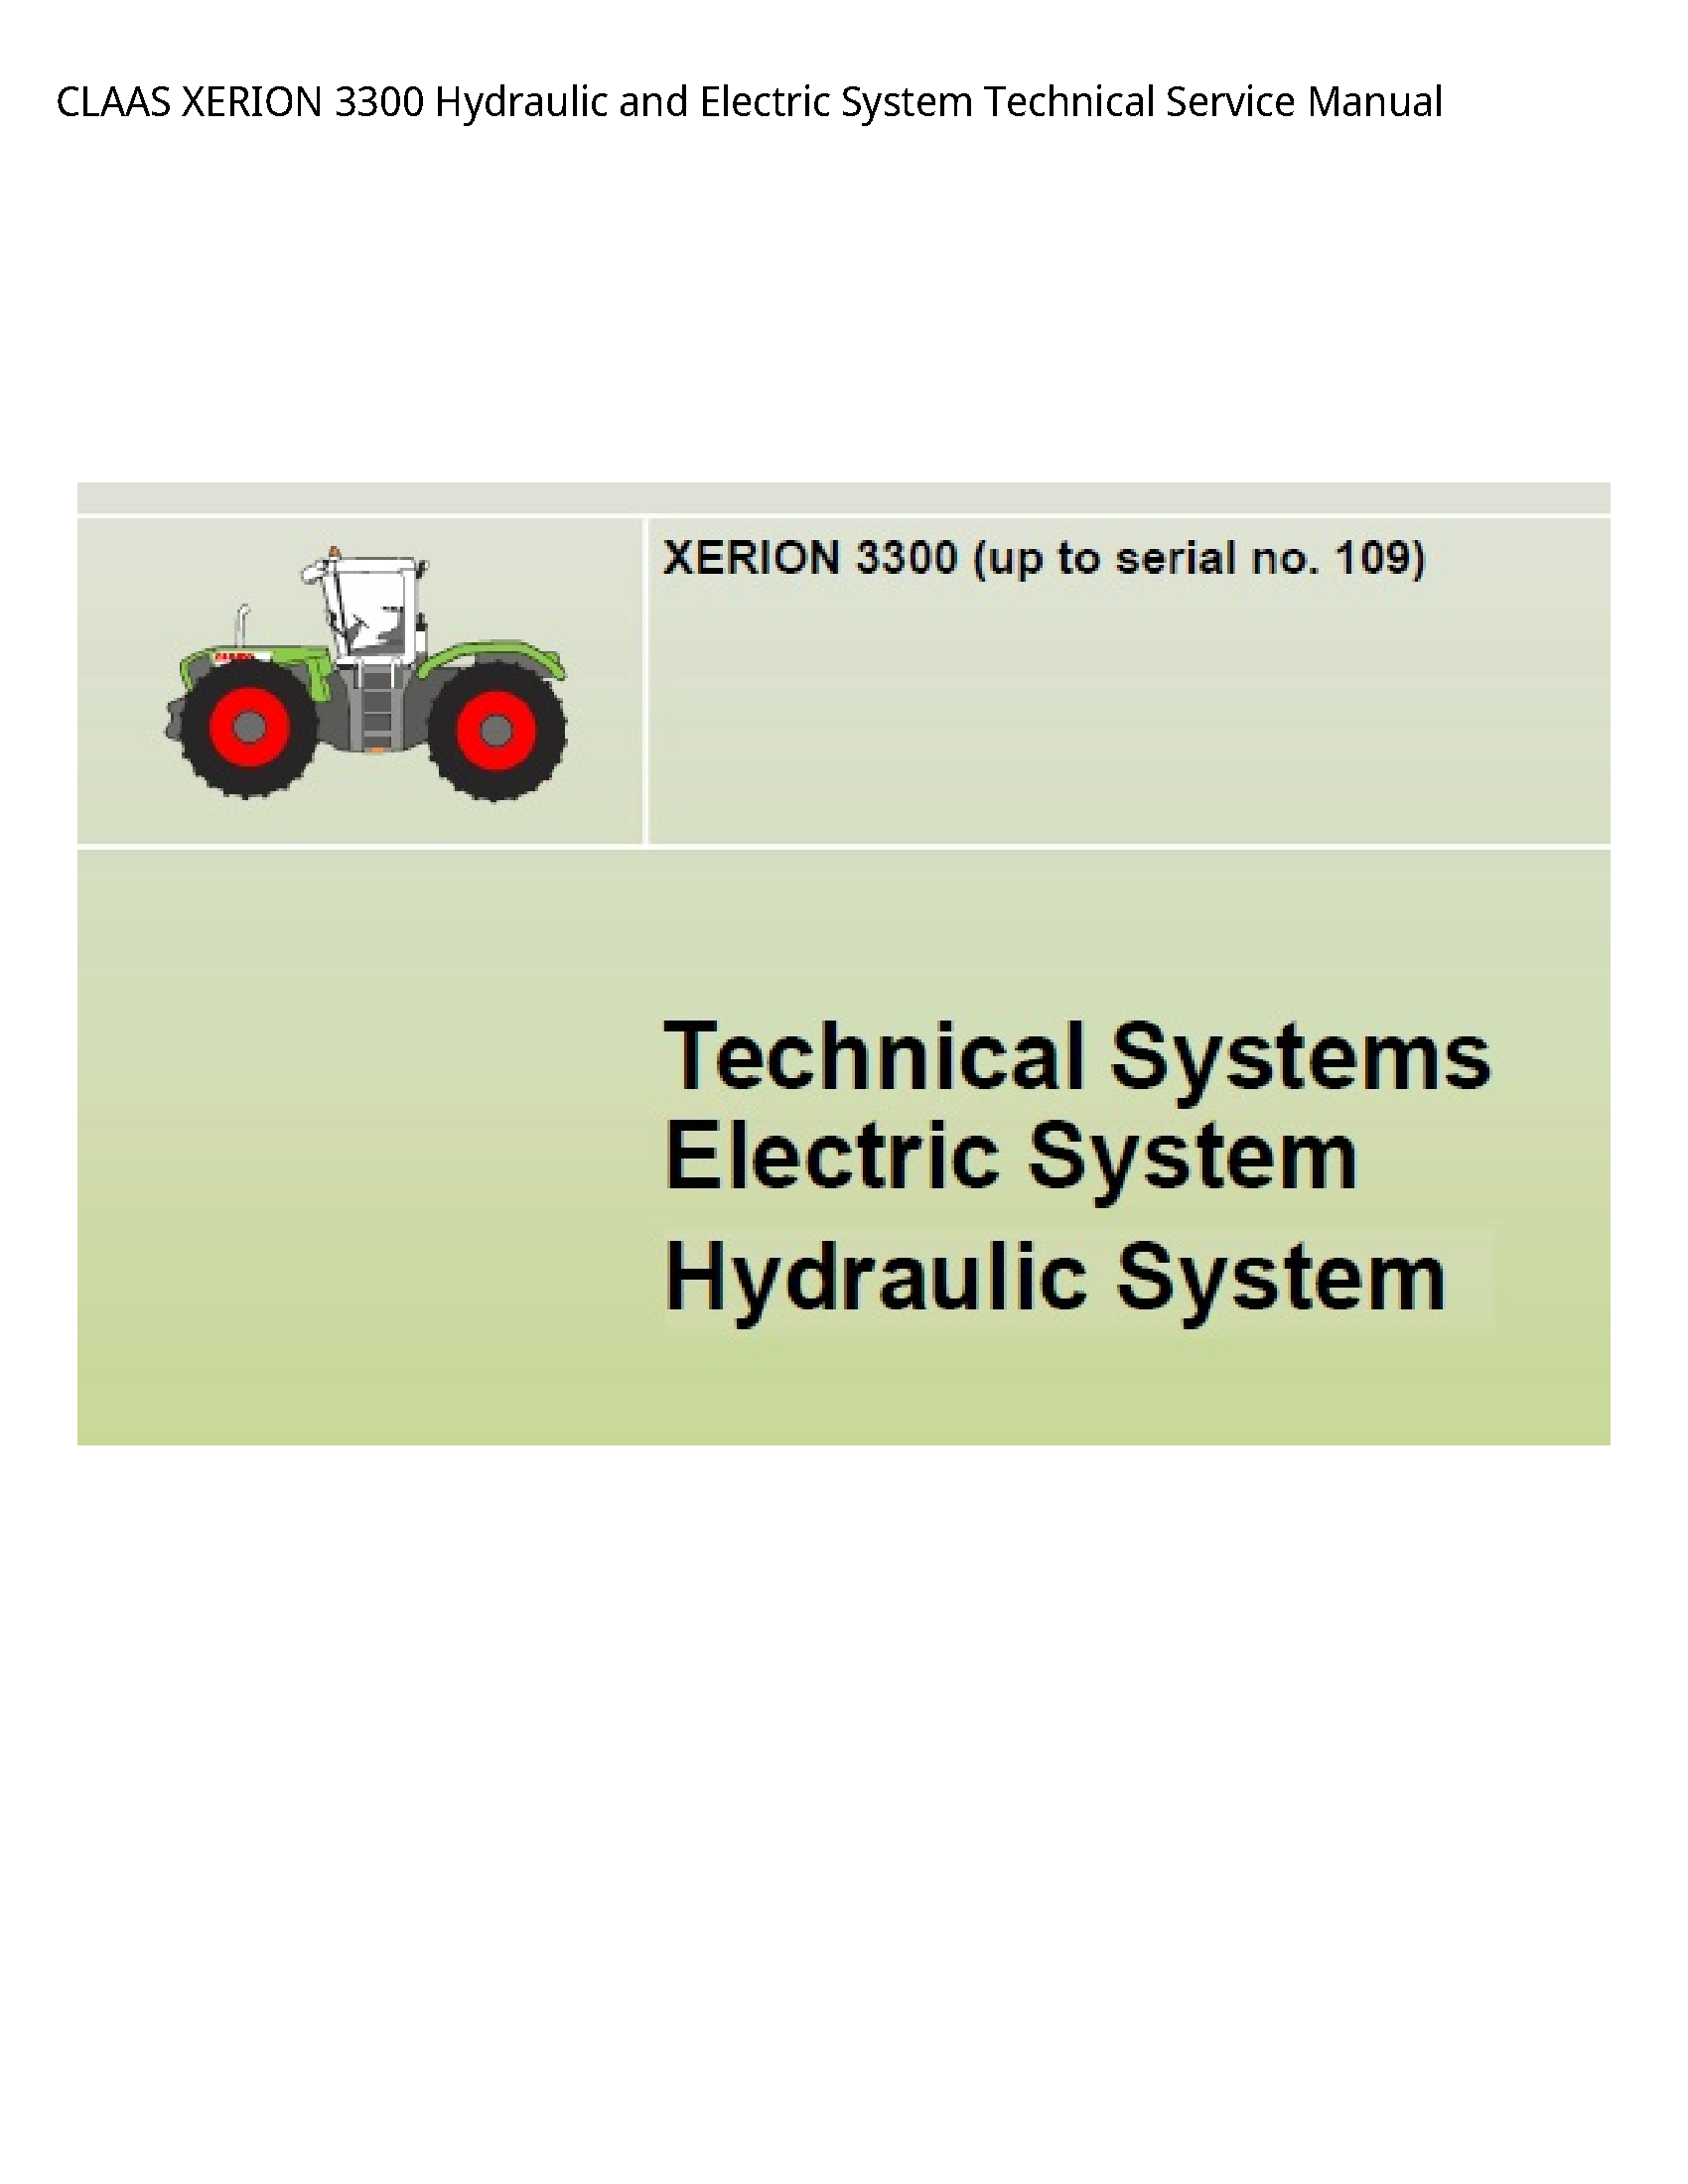 Claas 3300 XERION Hydraulic  Electric System Technical Service manual